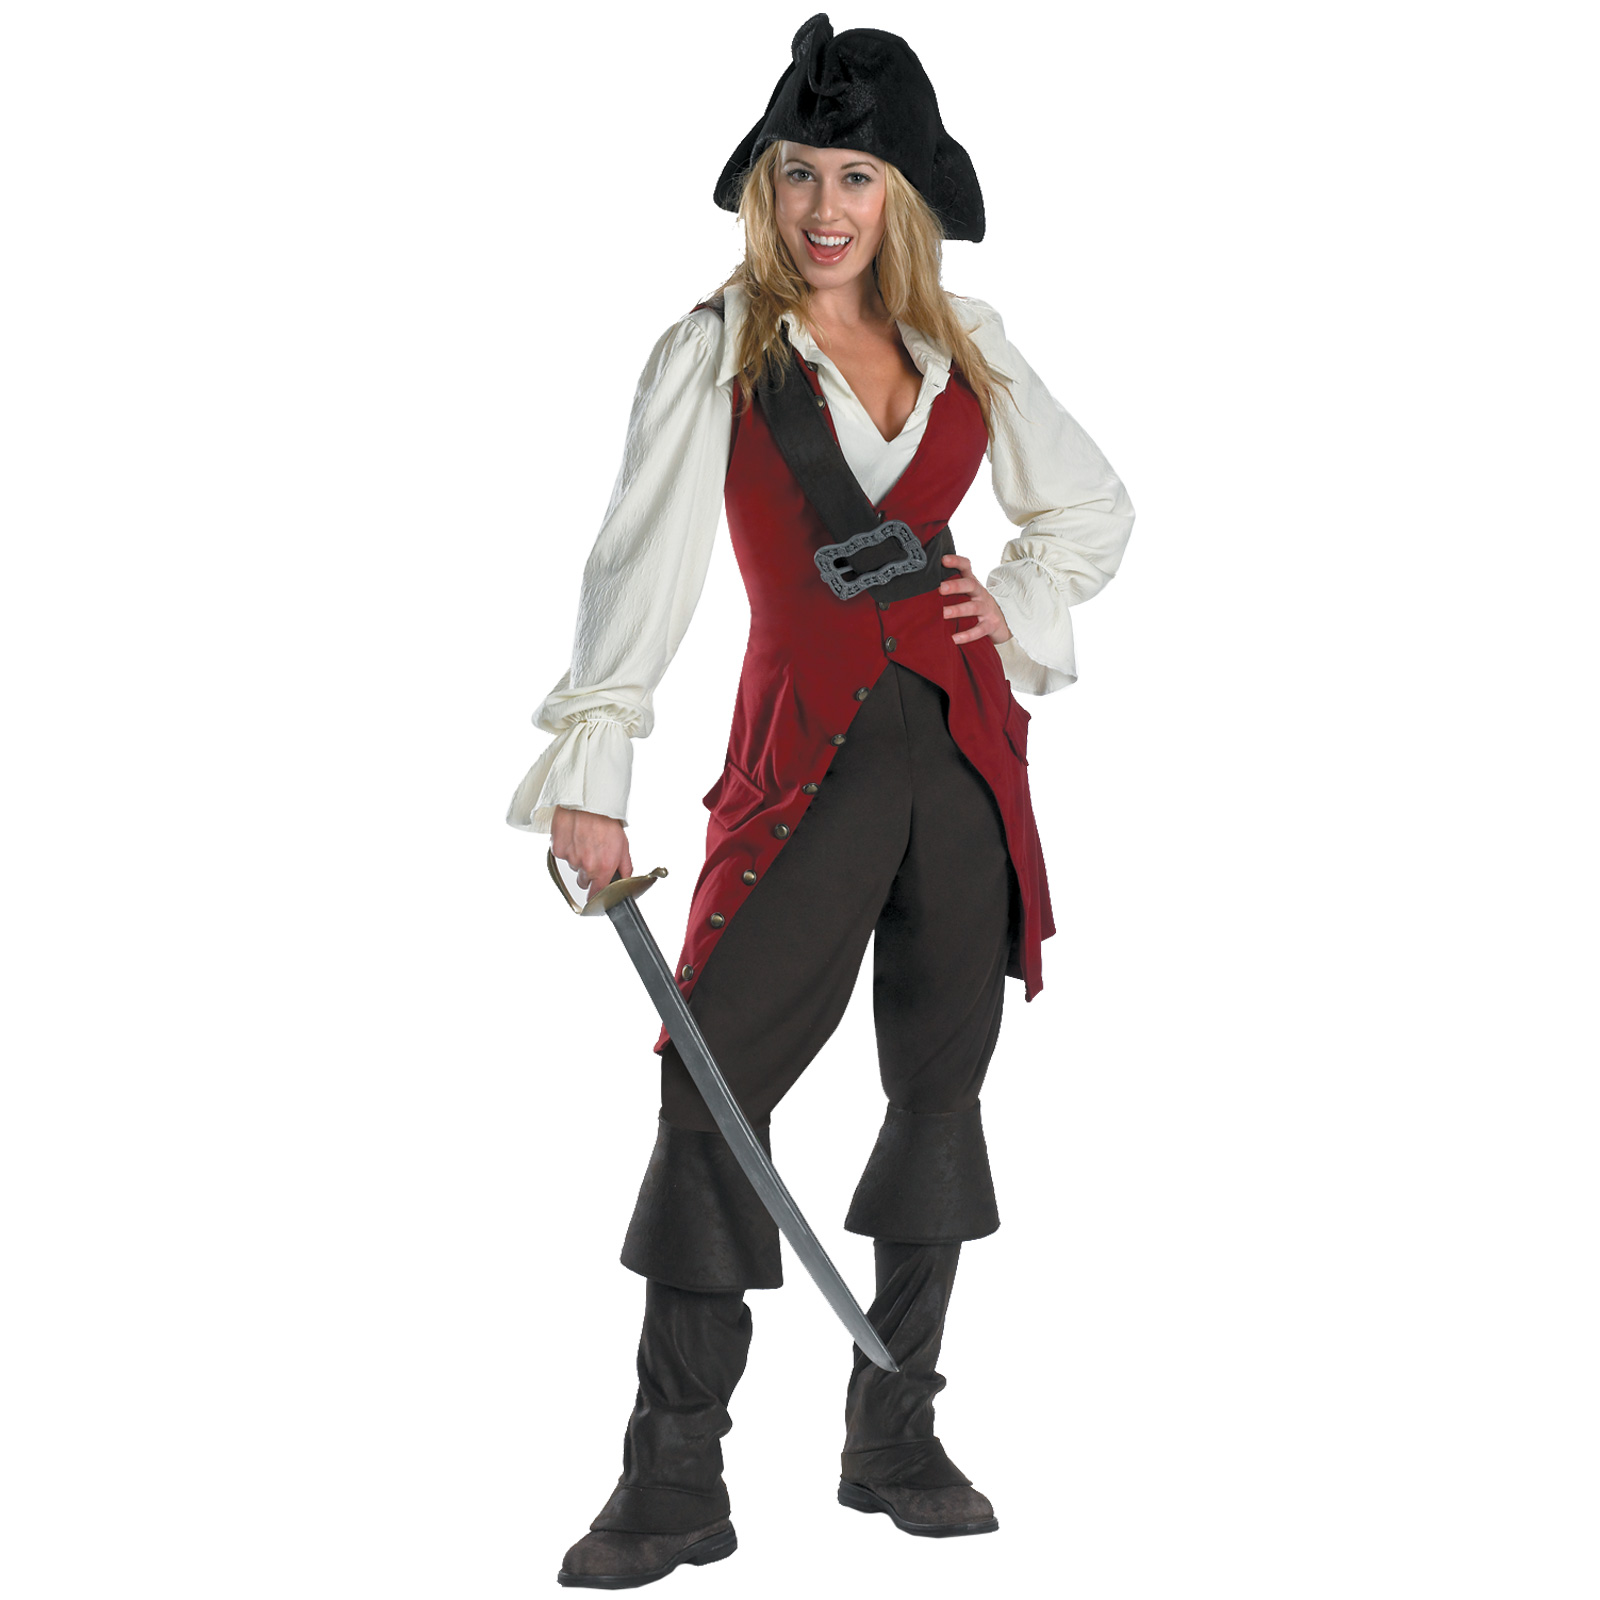 Image result for pirate inspired women's clothing